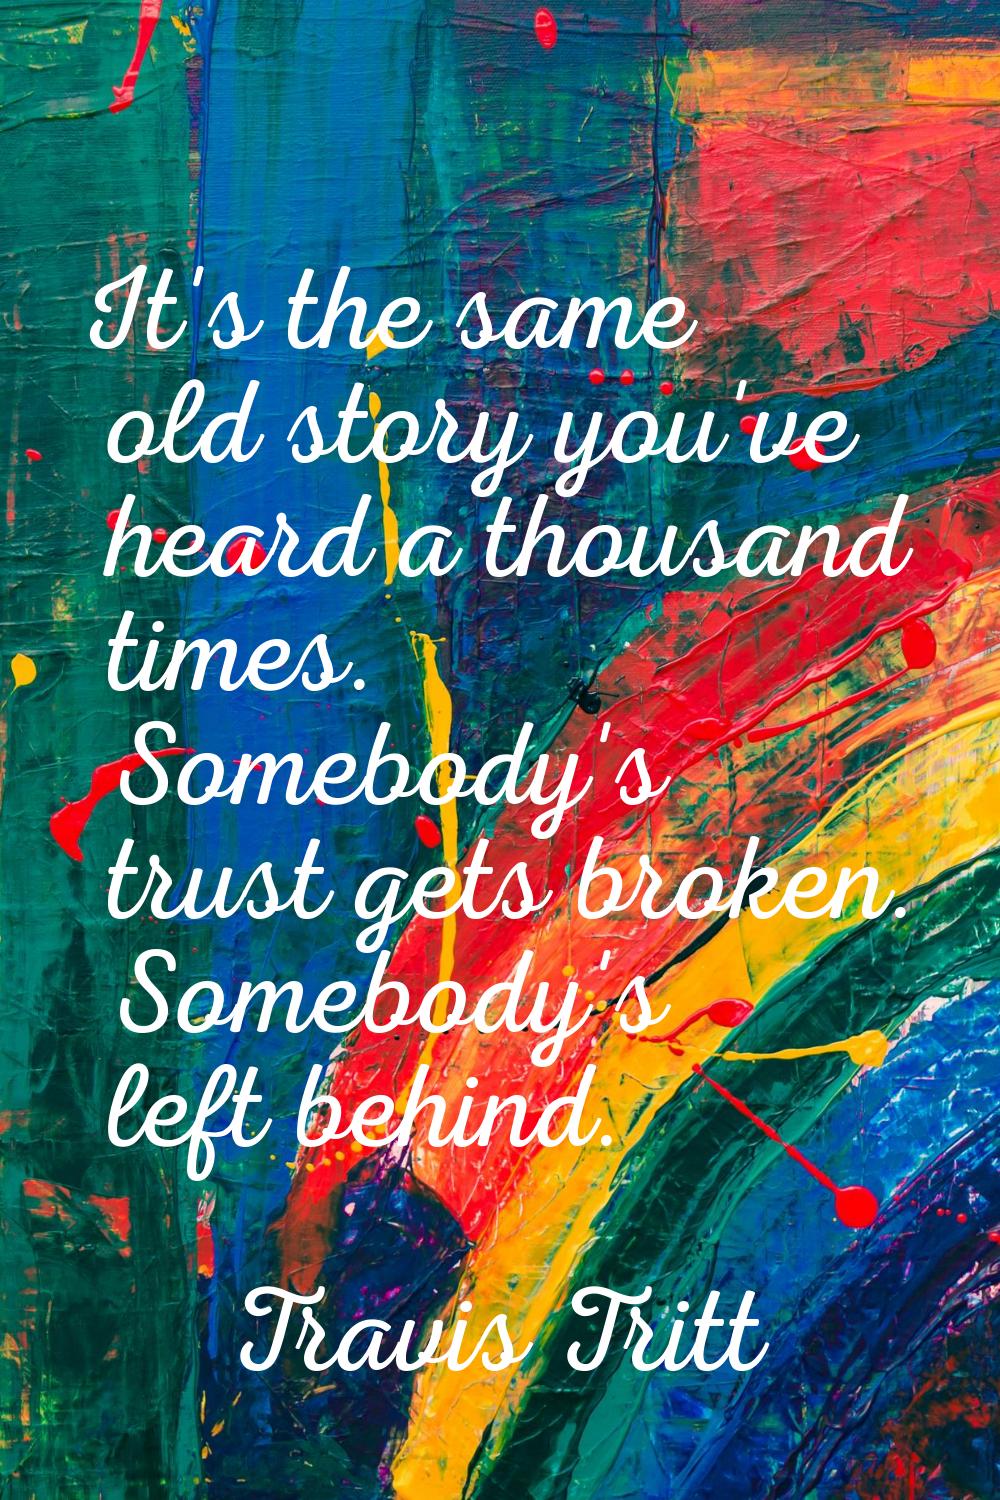 It's the same old story you've heard a thousand times. Somebody's trust gets broken. Somebody's lef